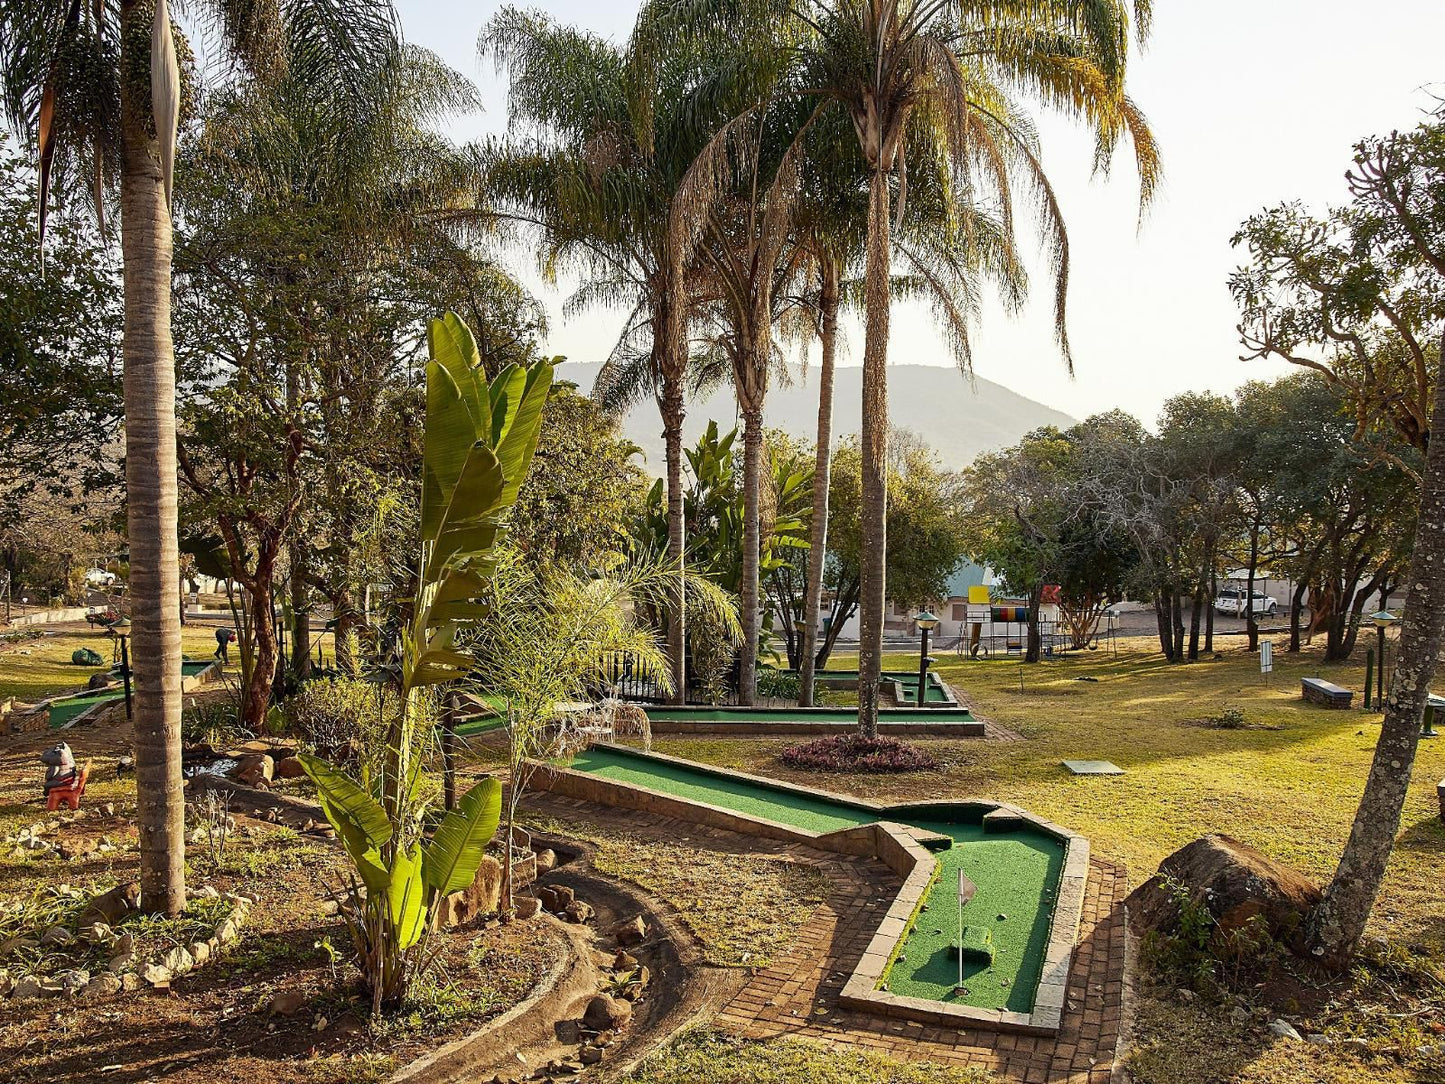 First Group Waterberry Hill Hazyview Mpumalanga South Africa Palm Tree, Plant, Nature, Wood, Garden, Golfing, Ball Game, Sport